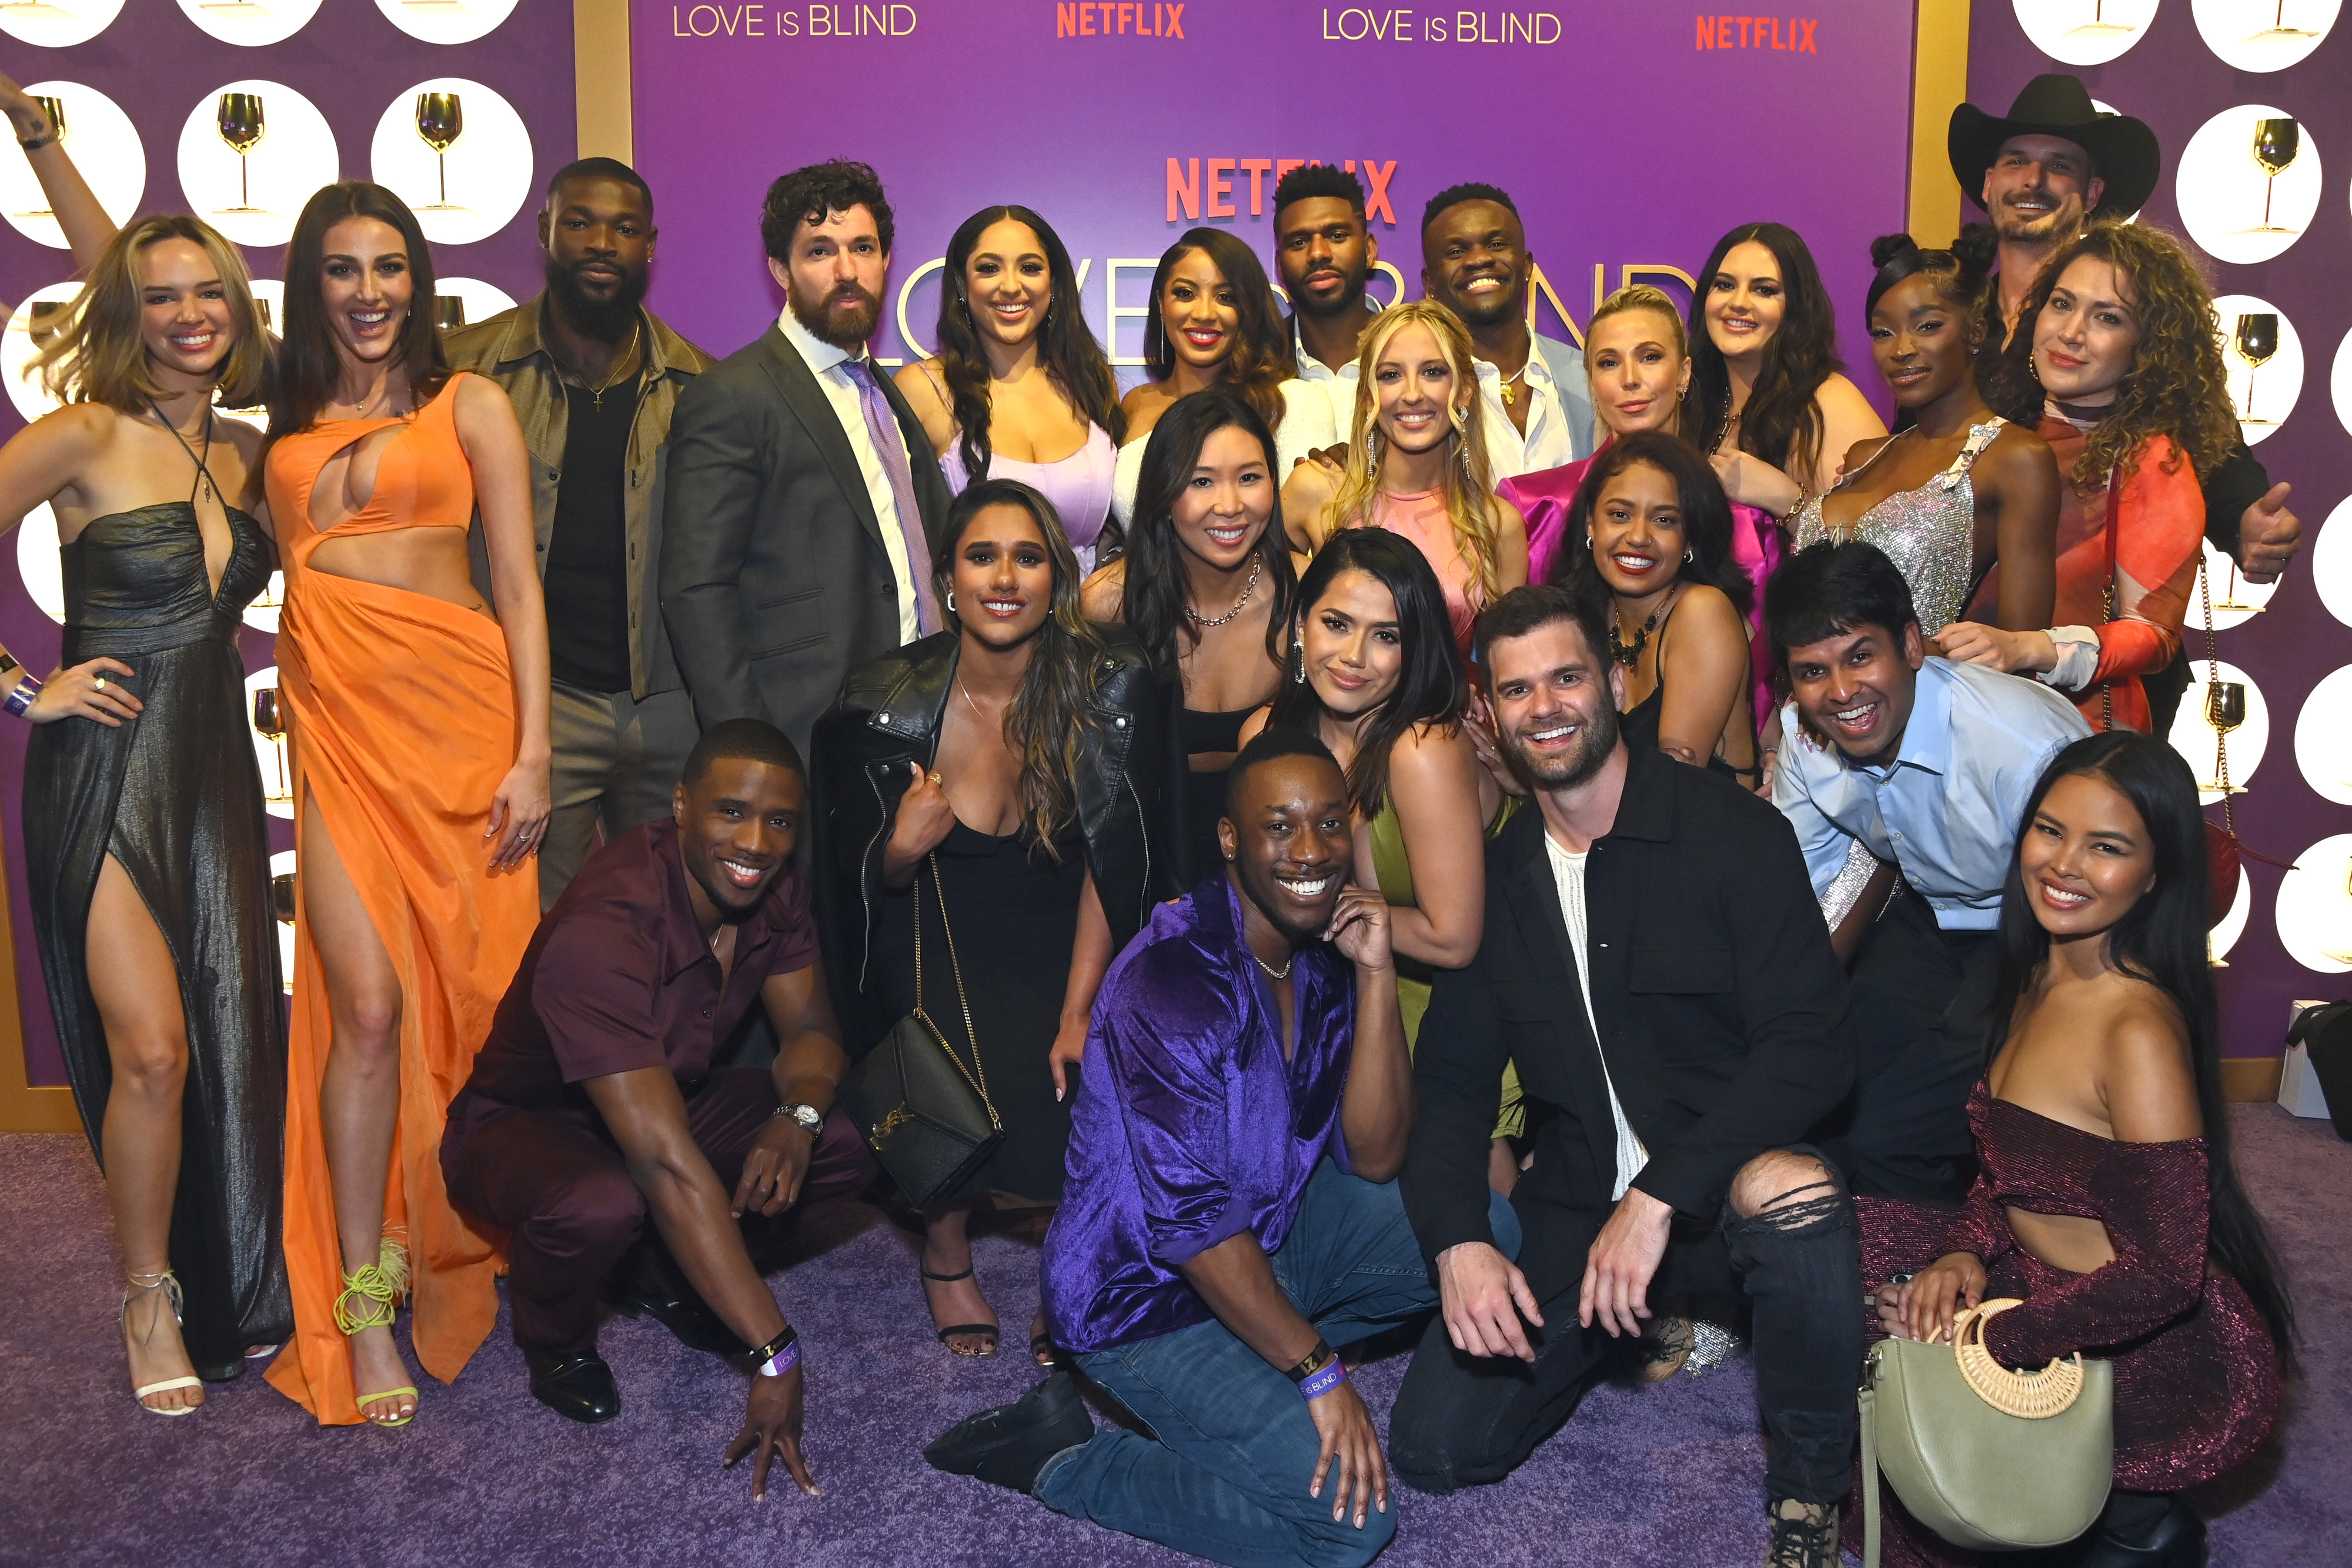 Group of &quot;Love is Blind&quot; reality show cast members posing together at a Netflix event